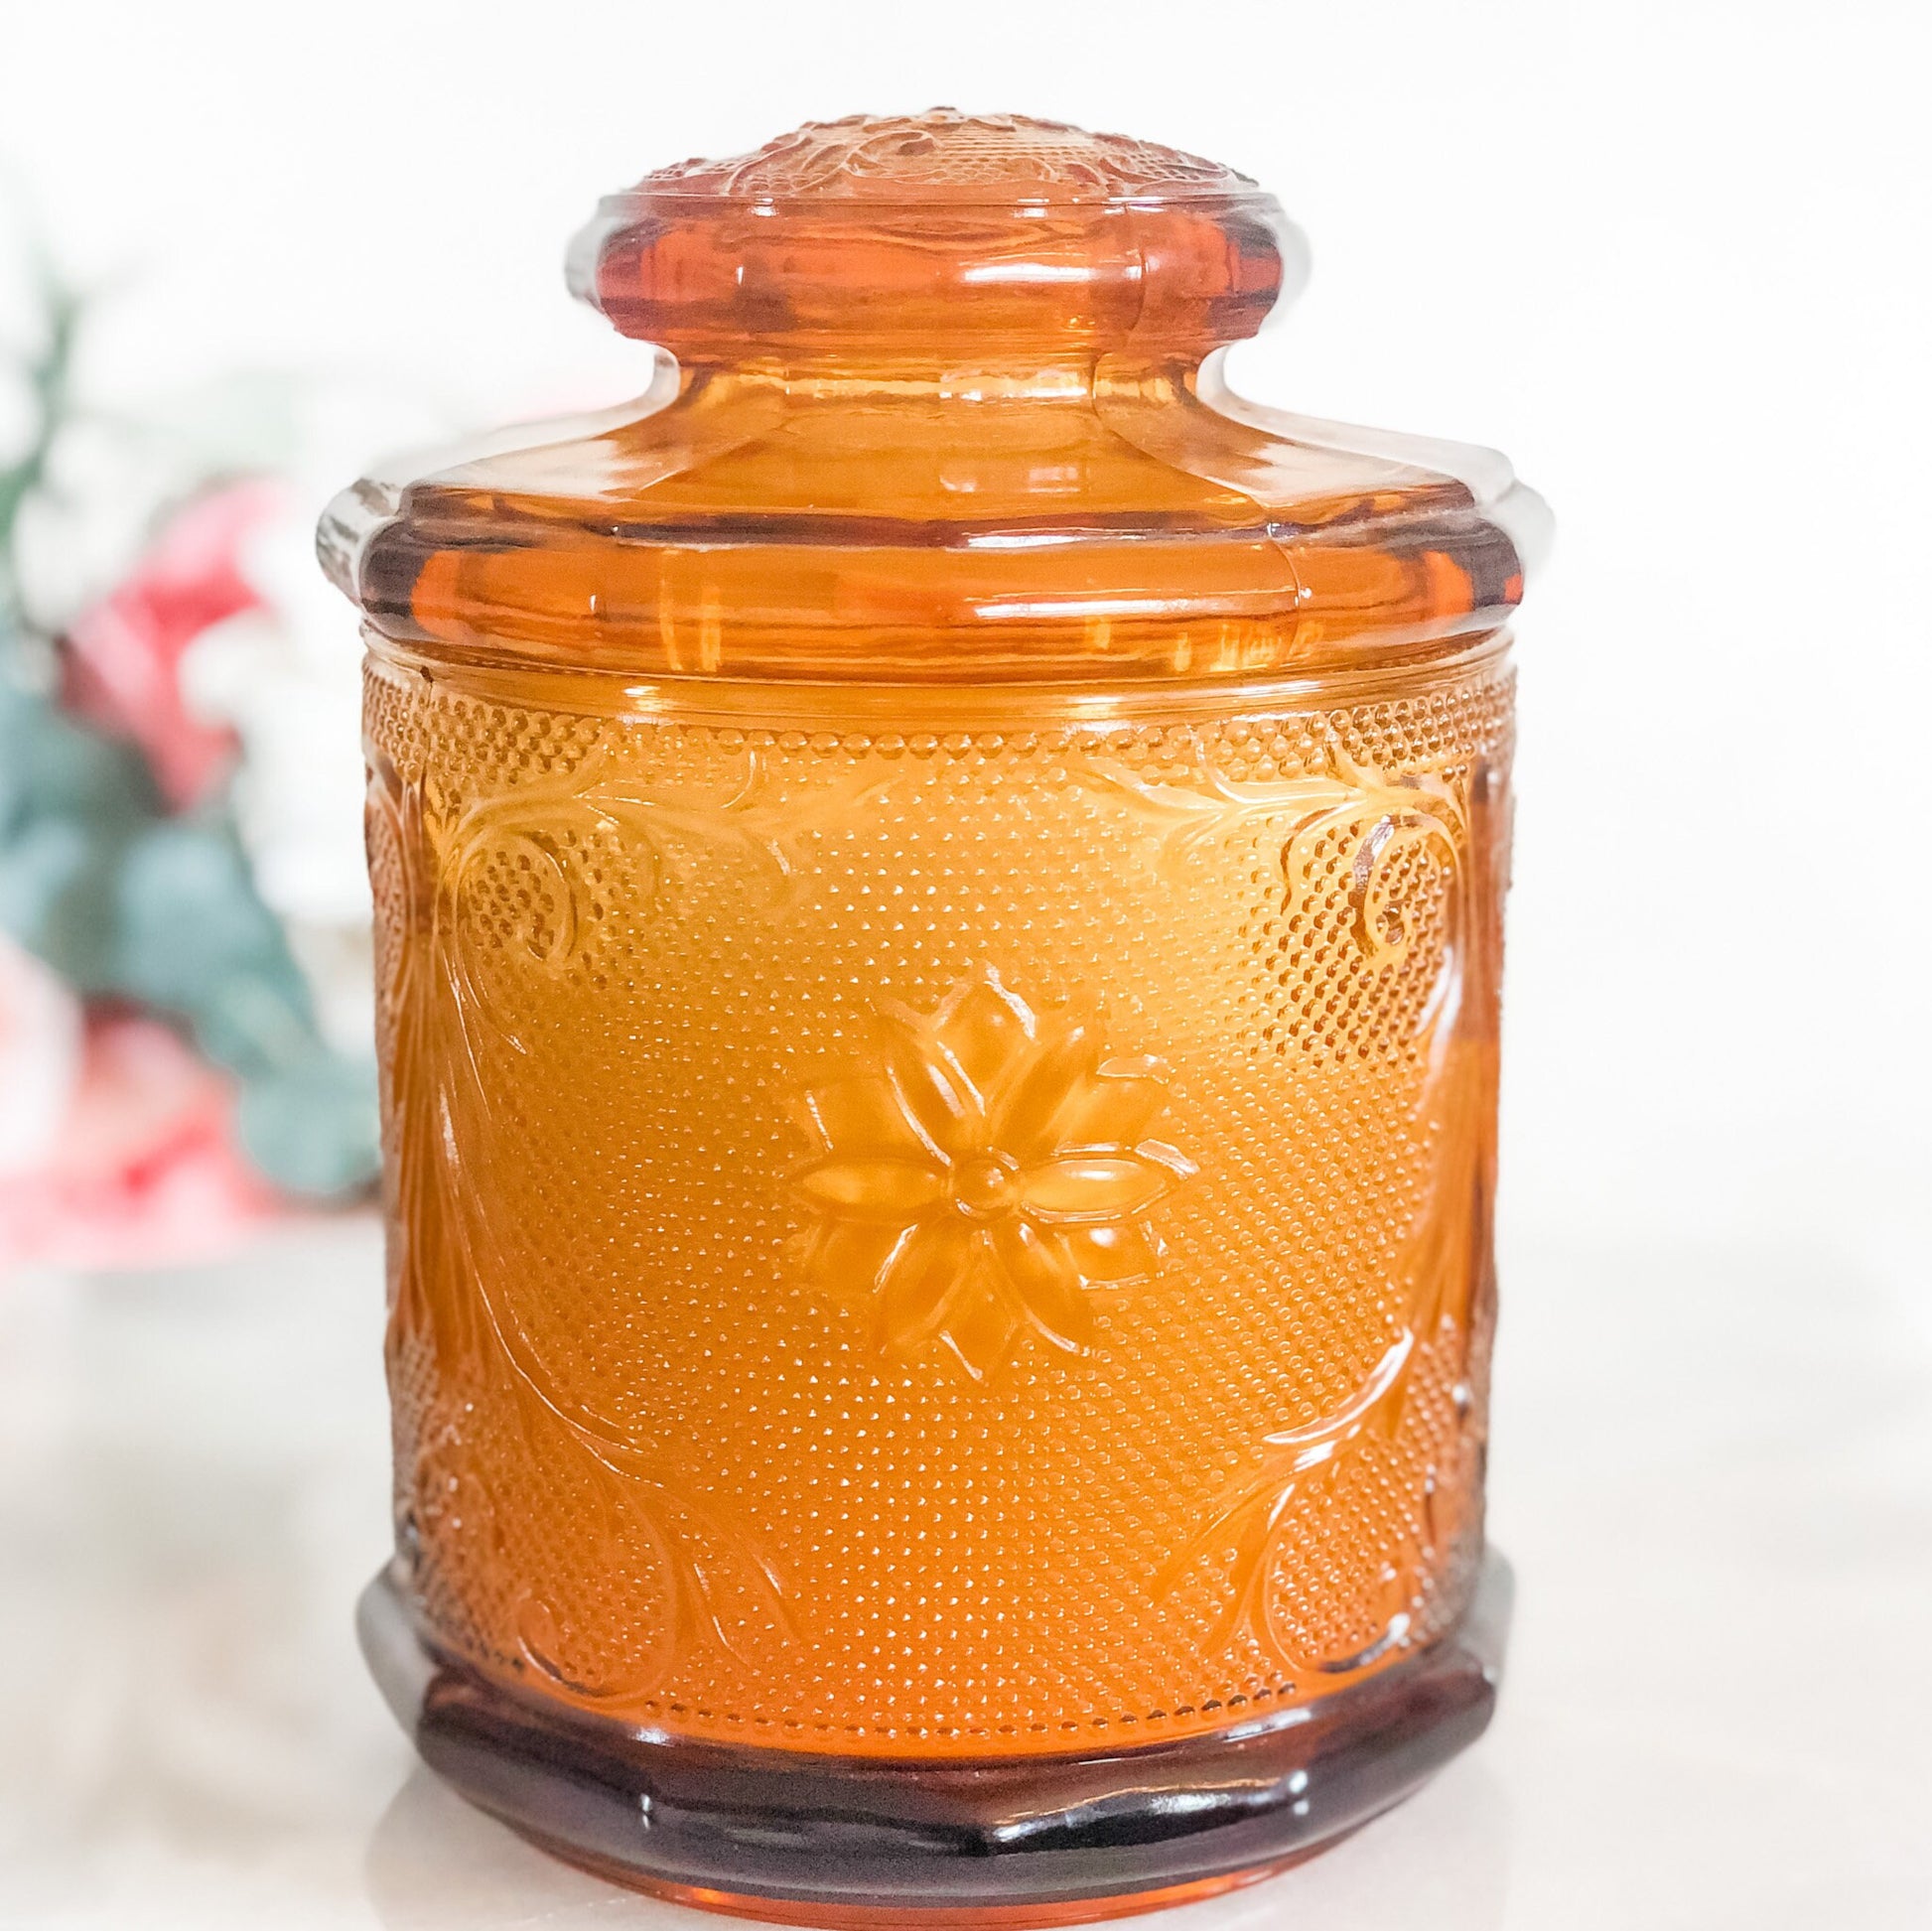 Scented Candles, Vintage Glass, Fall Centerpiece, Farmhouse Decor